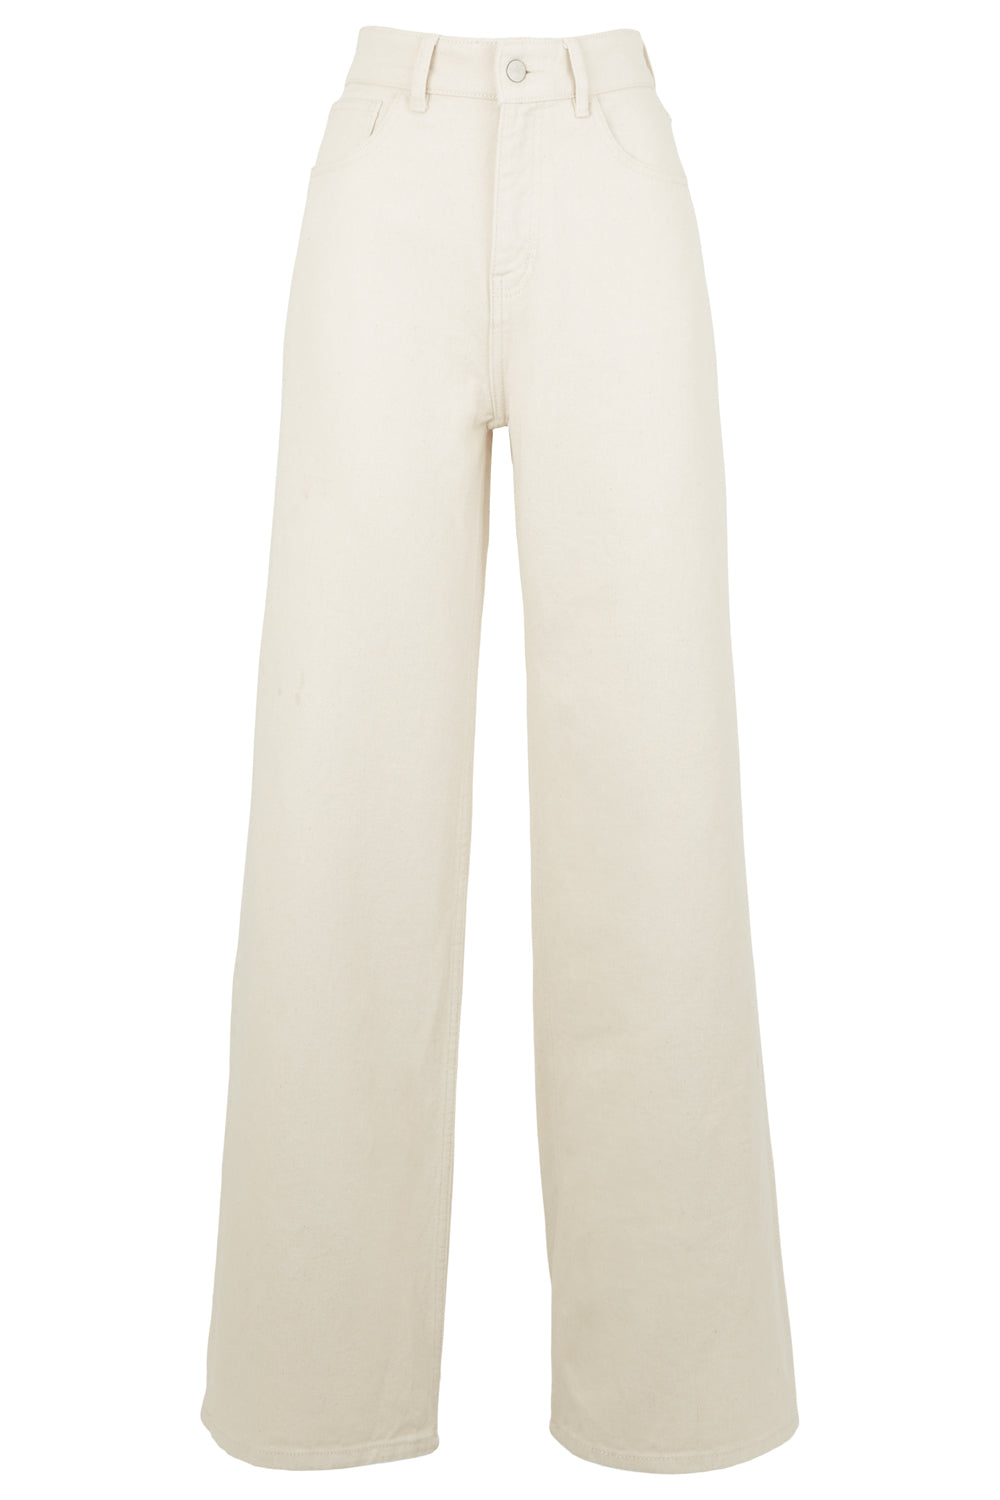 People Tree W's Flora Wide Leg Trousers - 100% Organic Cotton Natural Pants